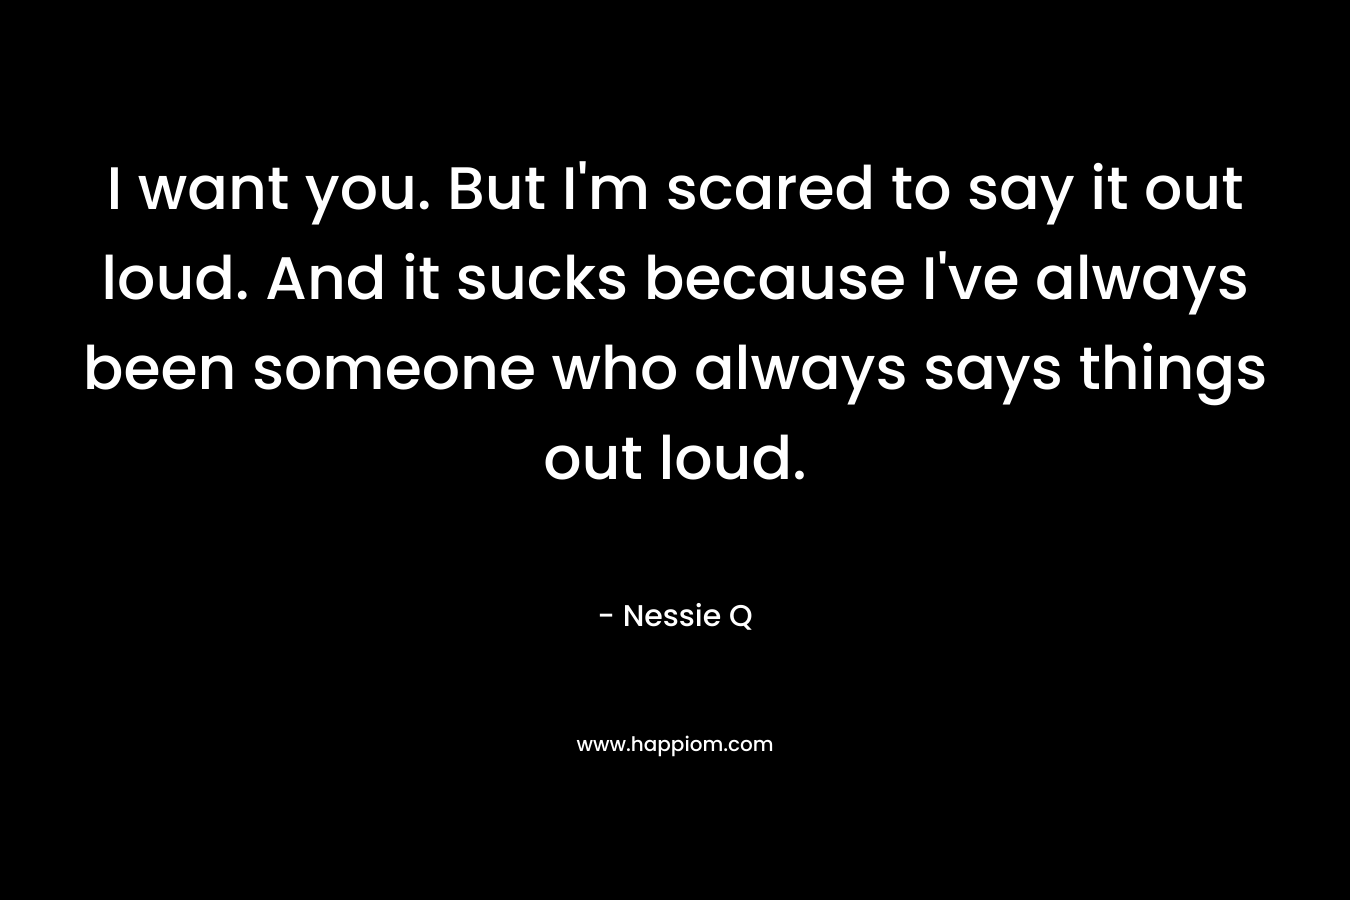 I want you. But I’m scared to say it out loud. And it sucks because I’ve always been someone who always says things out loud. – Nessie Q